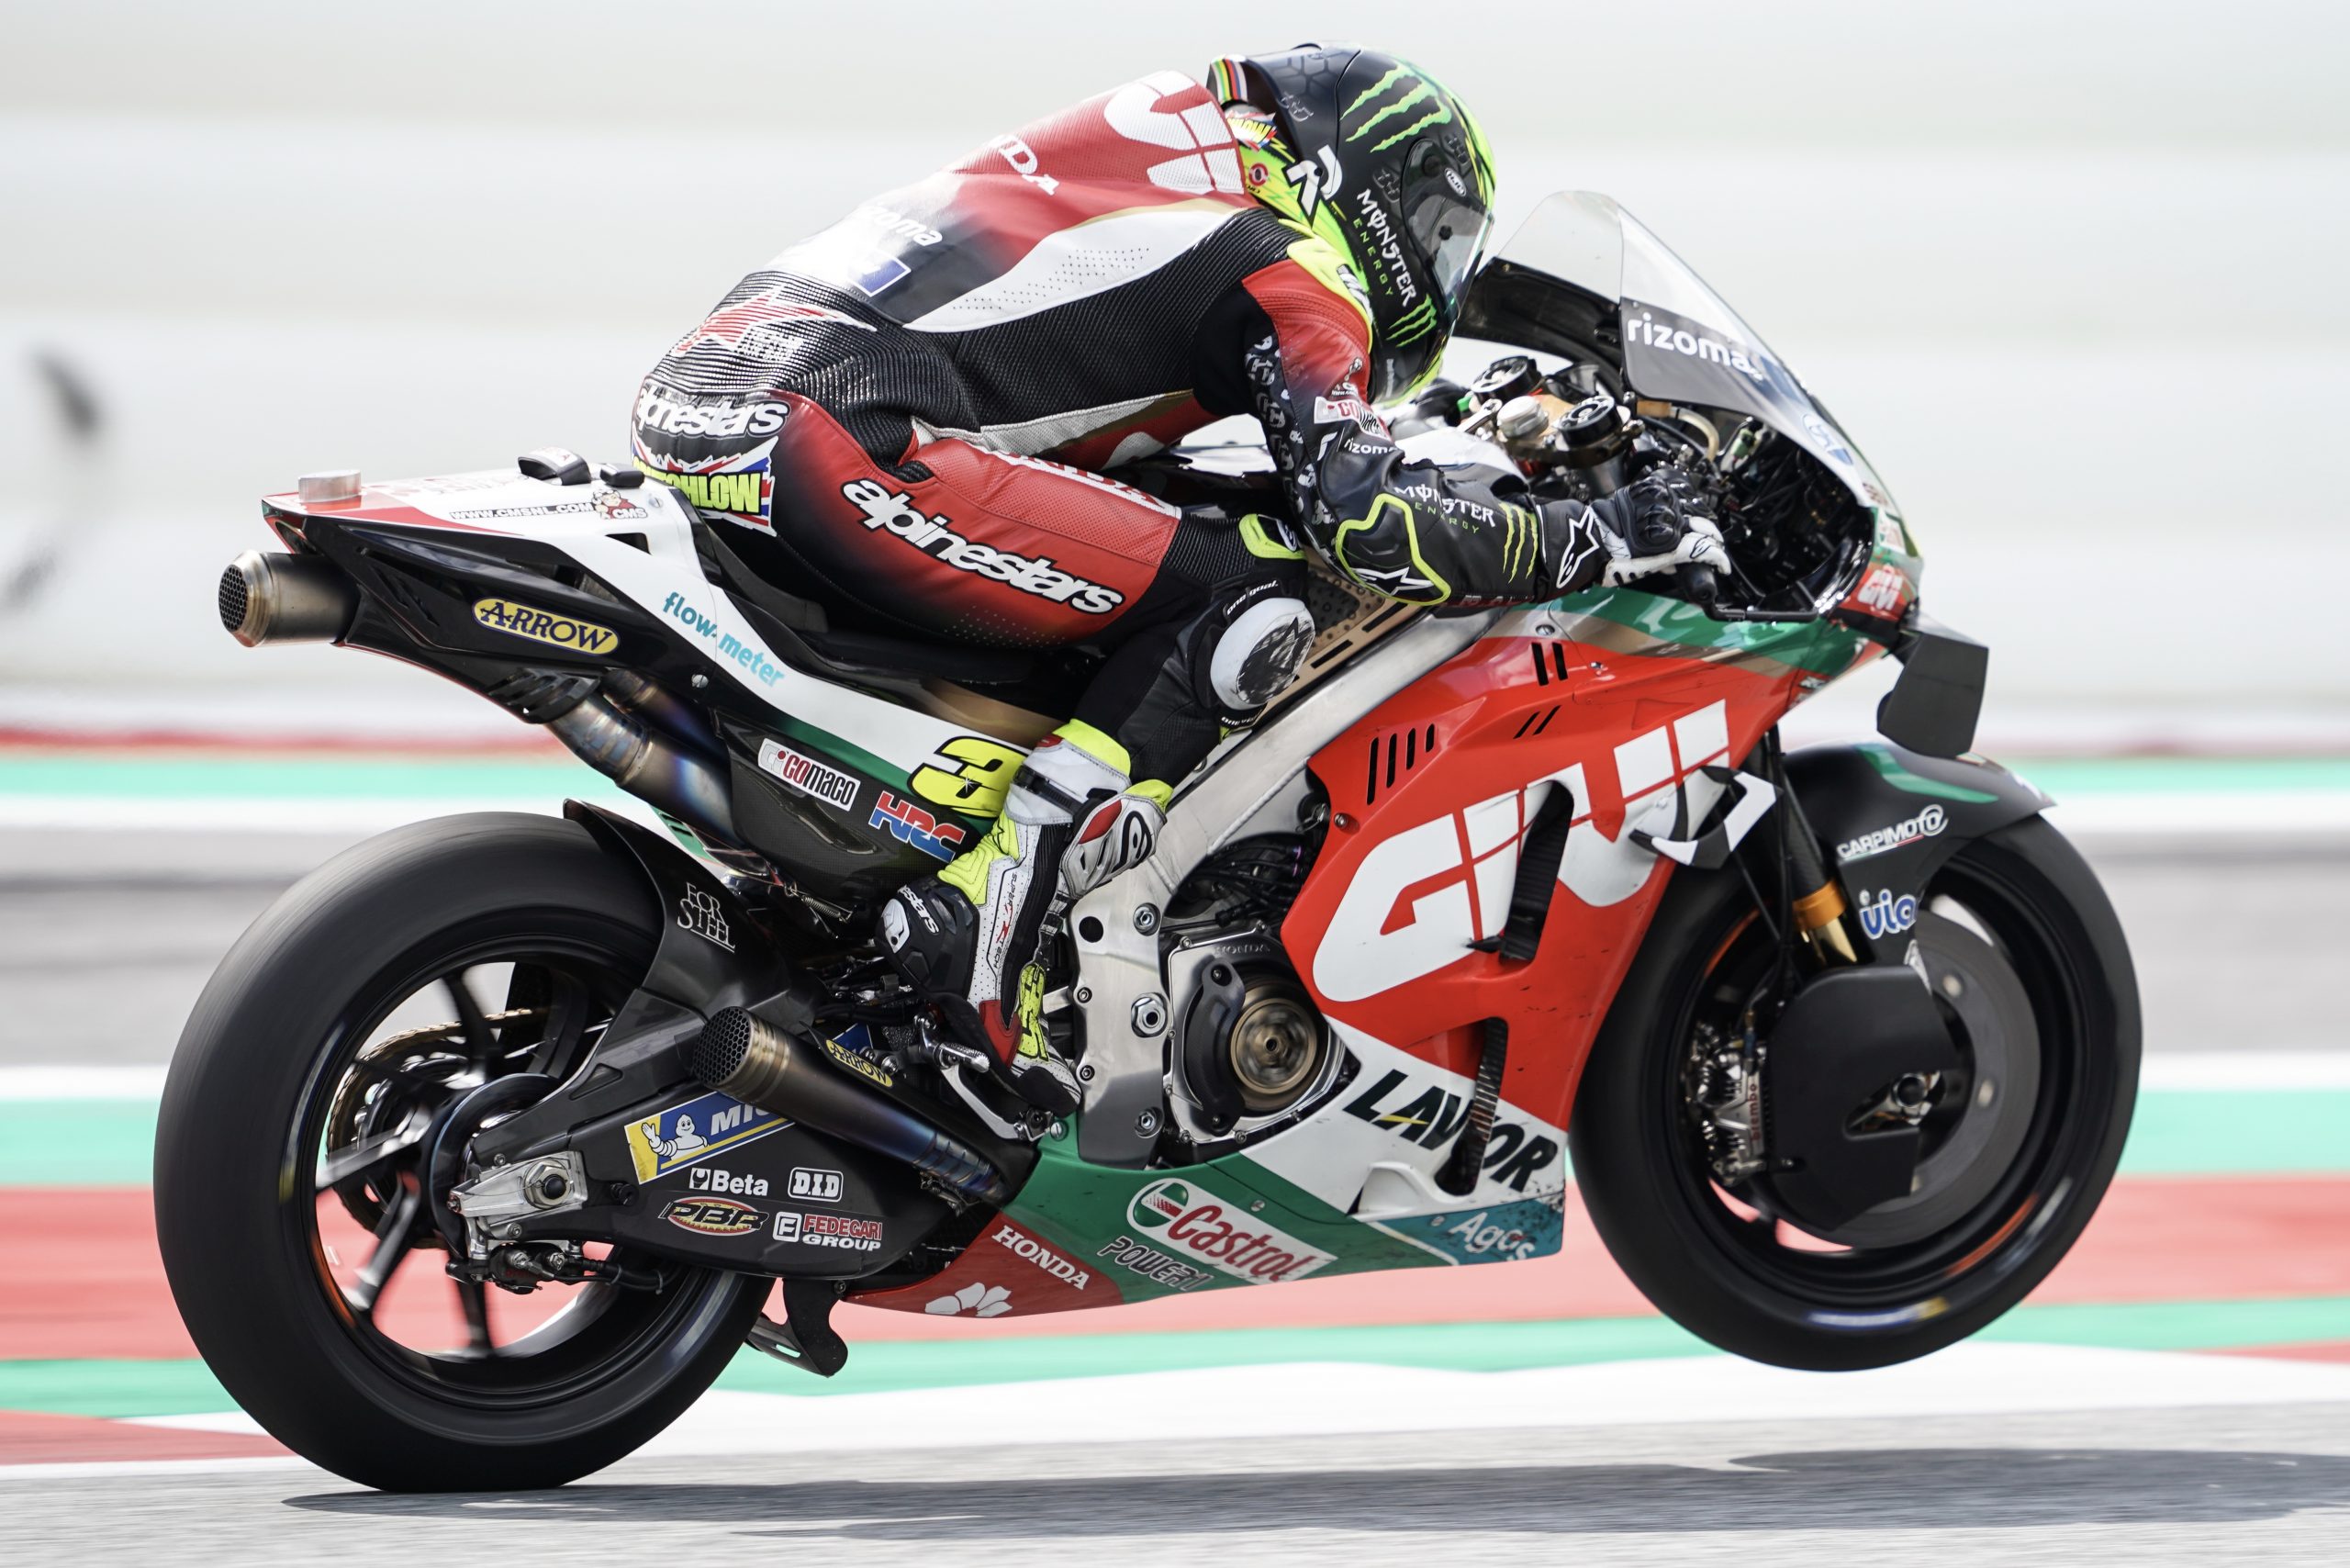 Points finish for Crutchlow in Austria